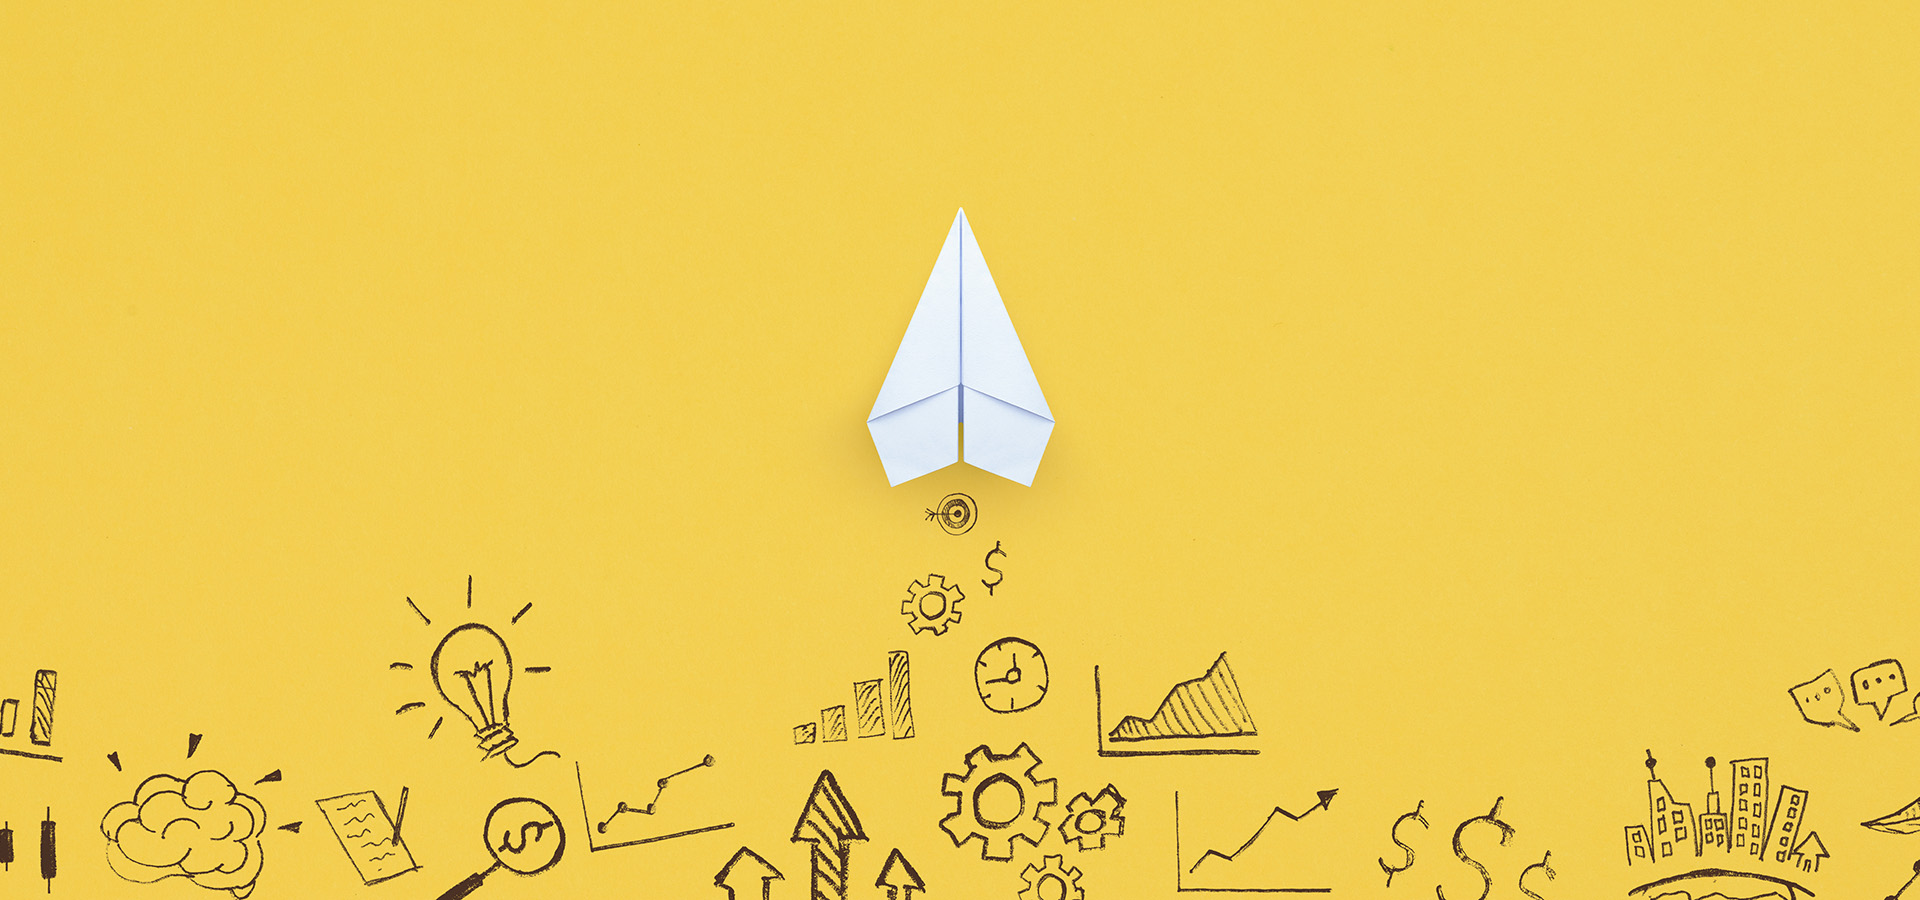 White paper airplane on yellow background